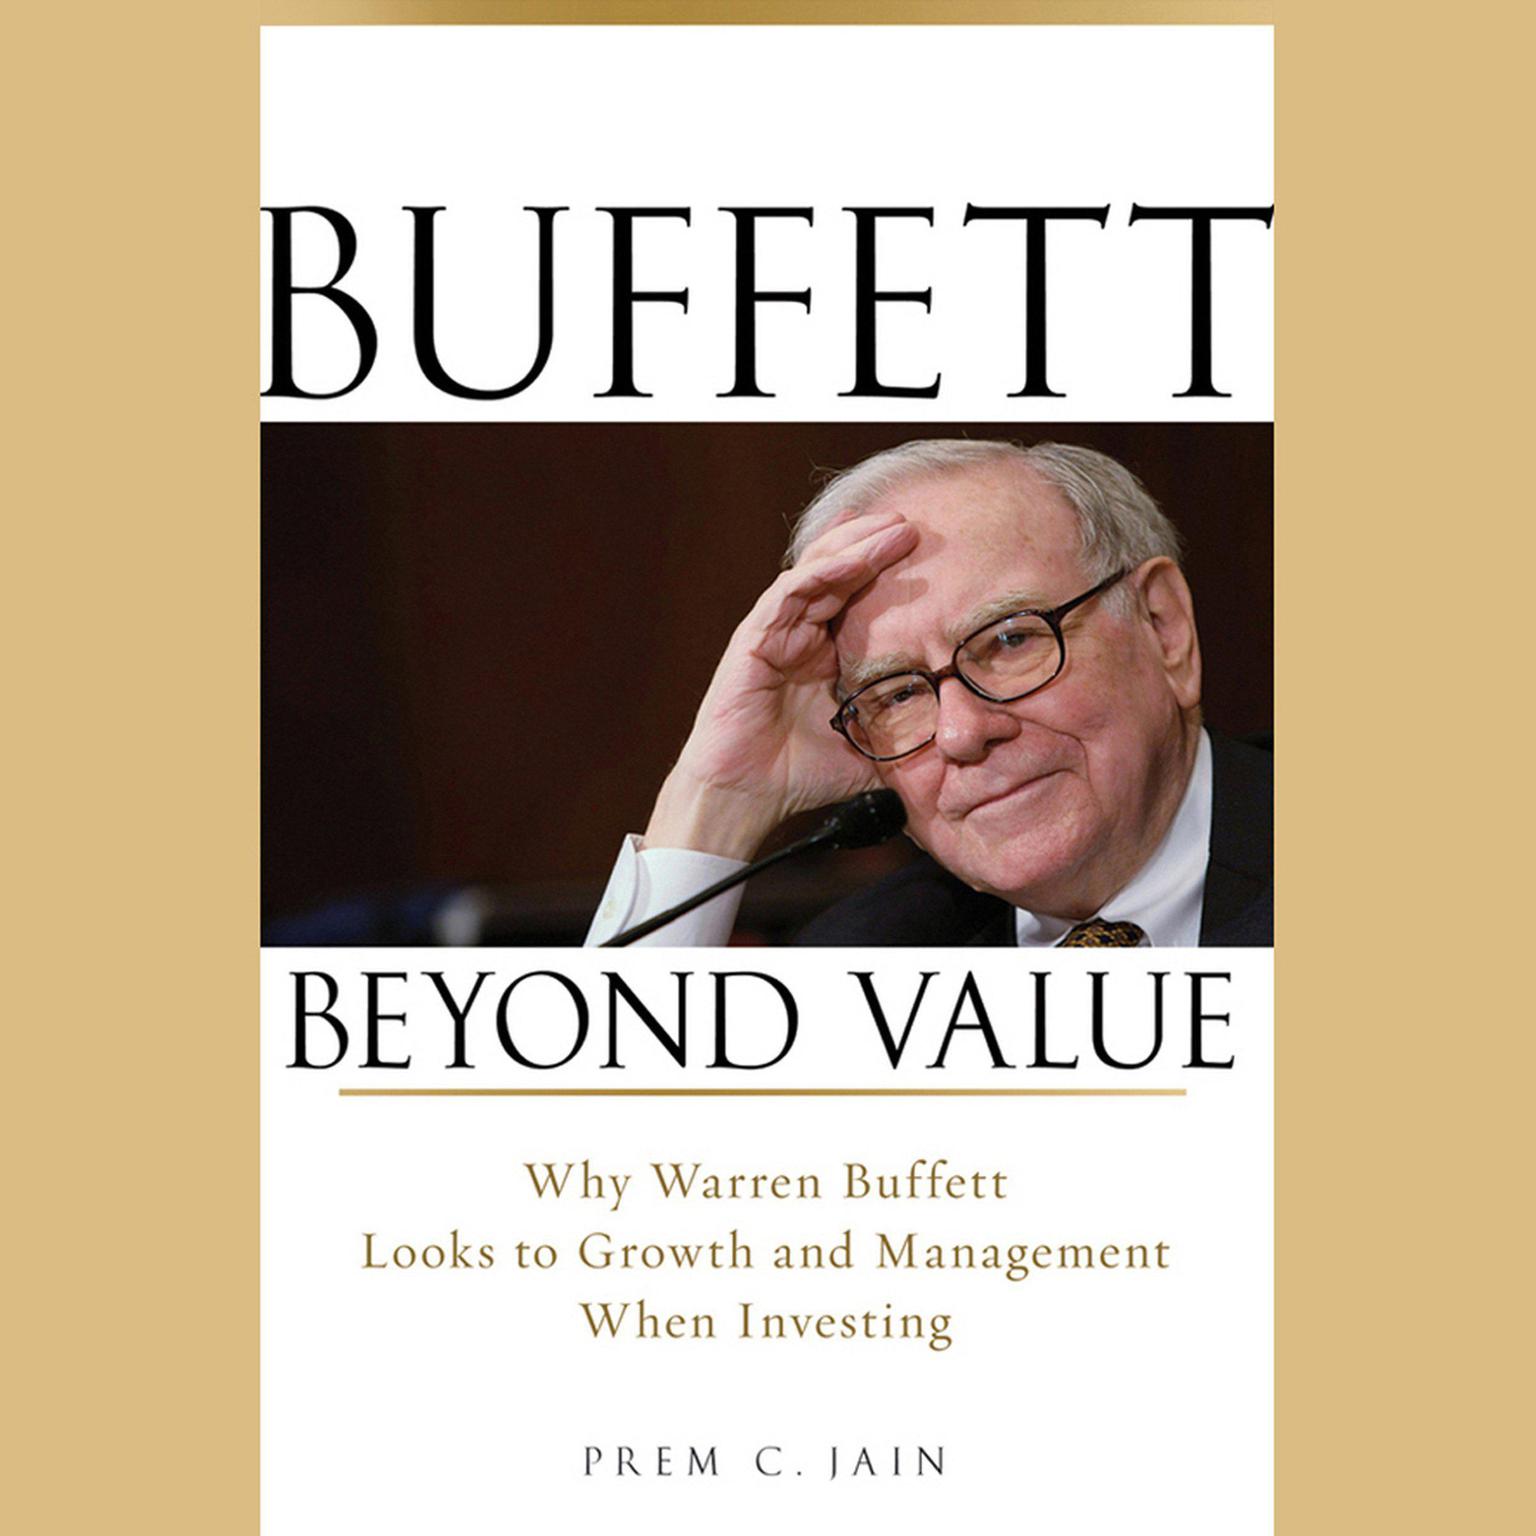 Buffett Beyond Value: Why Warren Buffett Looks to Growth and Management When Investing Audiobook, by Prem C. Jain